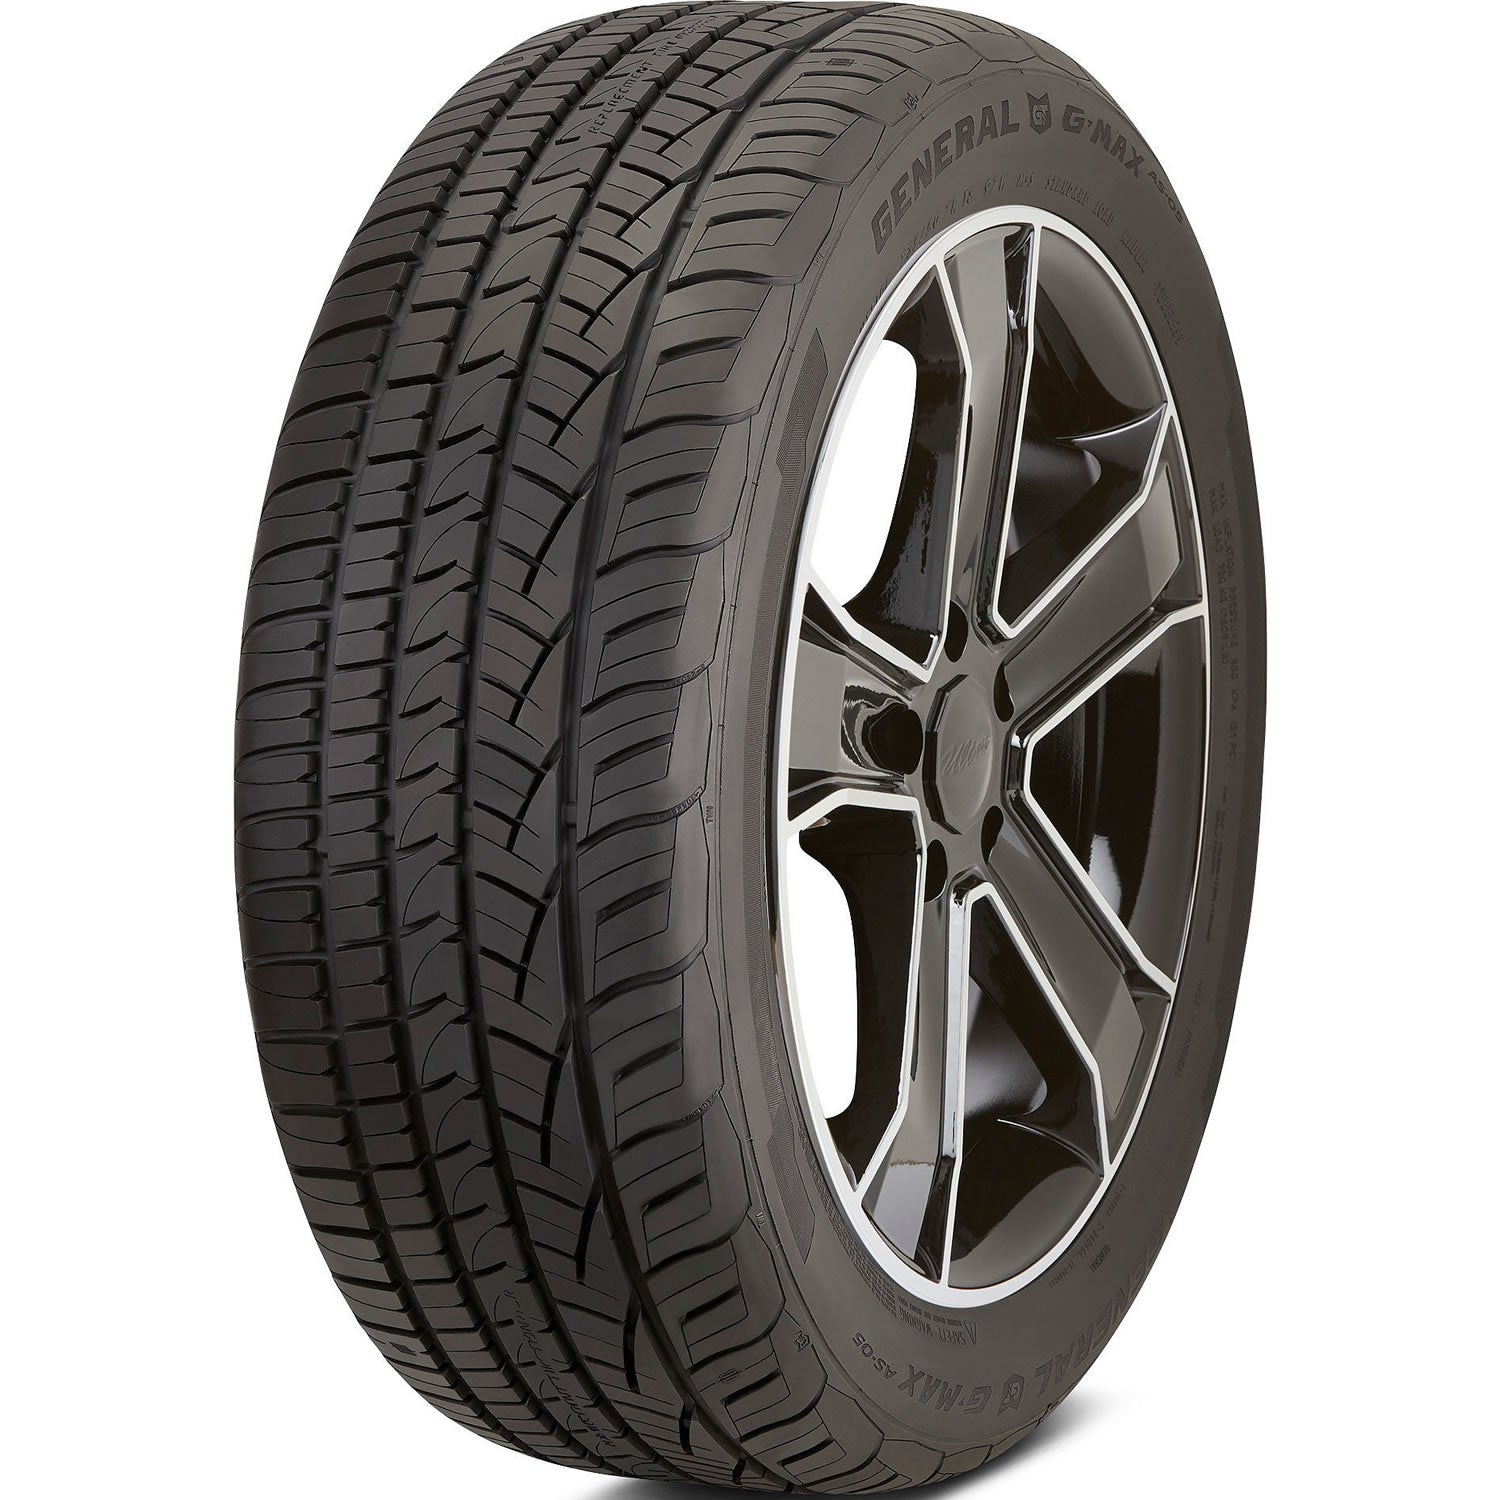 GENERAL G-MAX AS-05 245/40ZR17 (24.7X9.7R 17) Tires